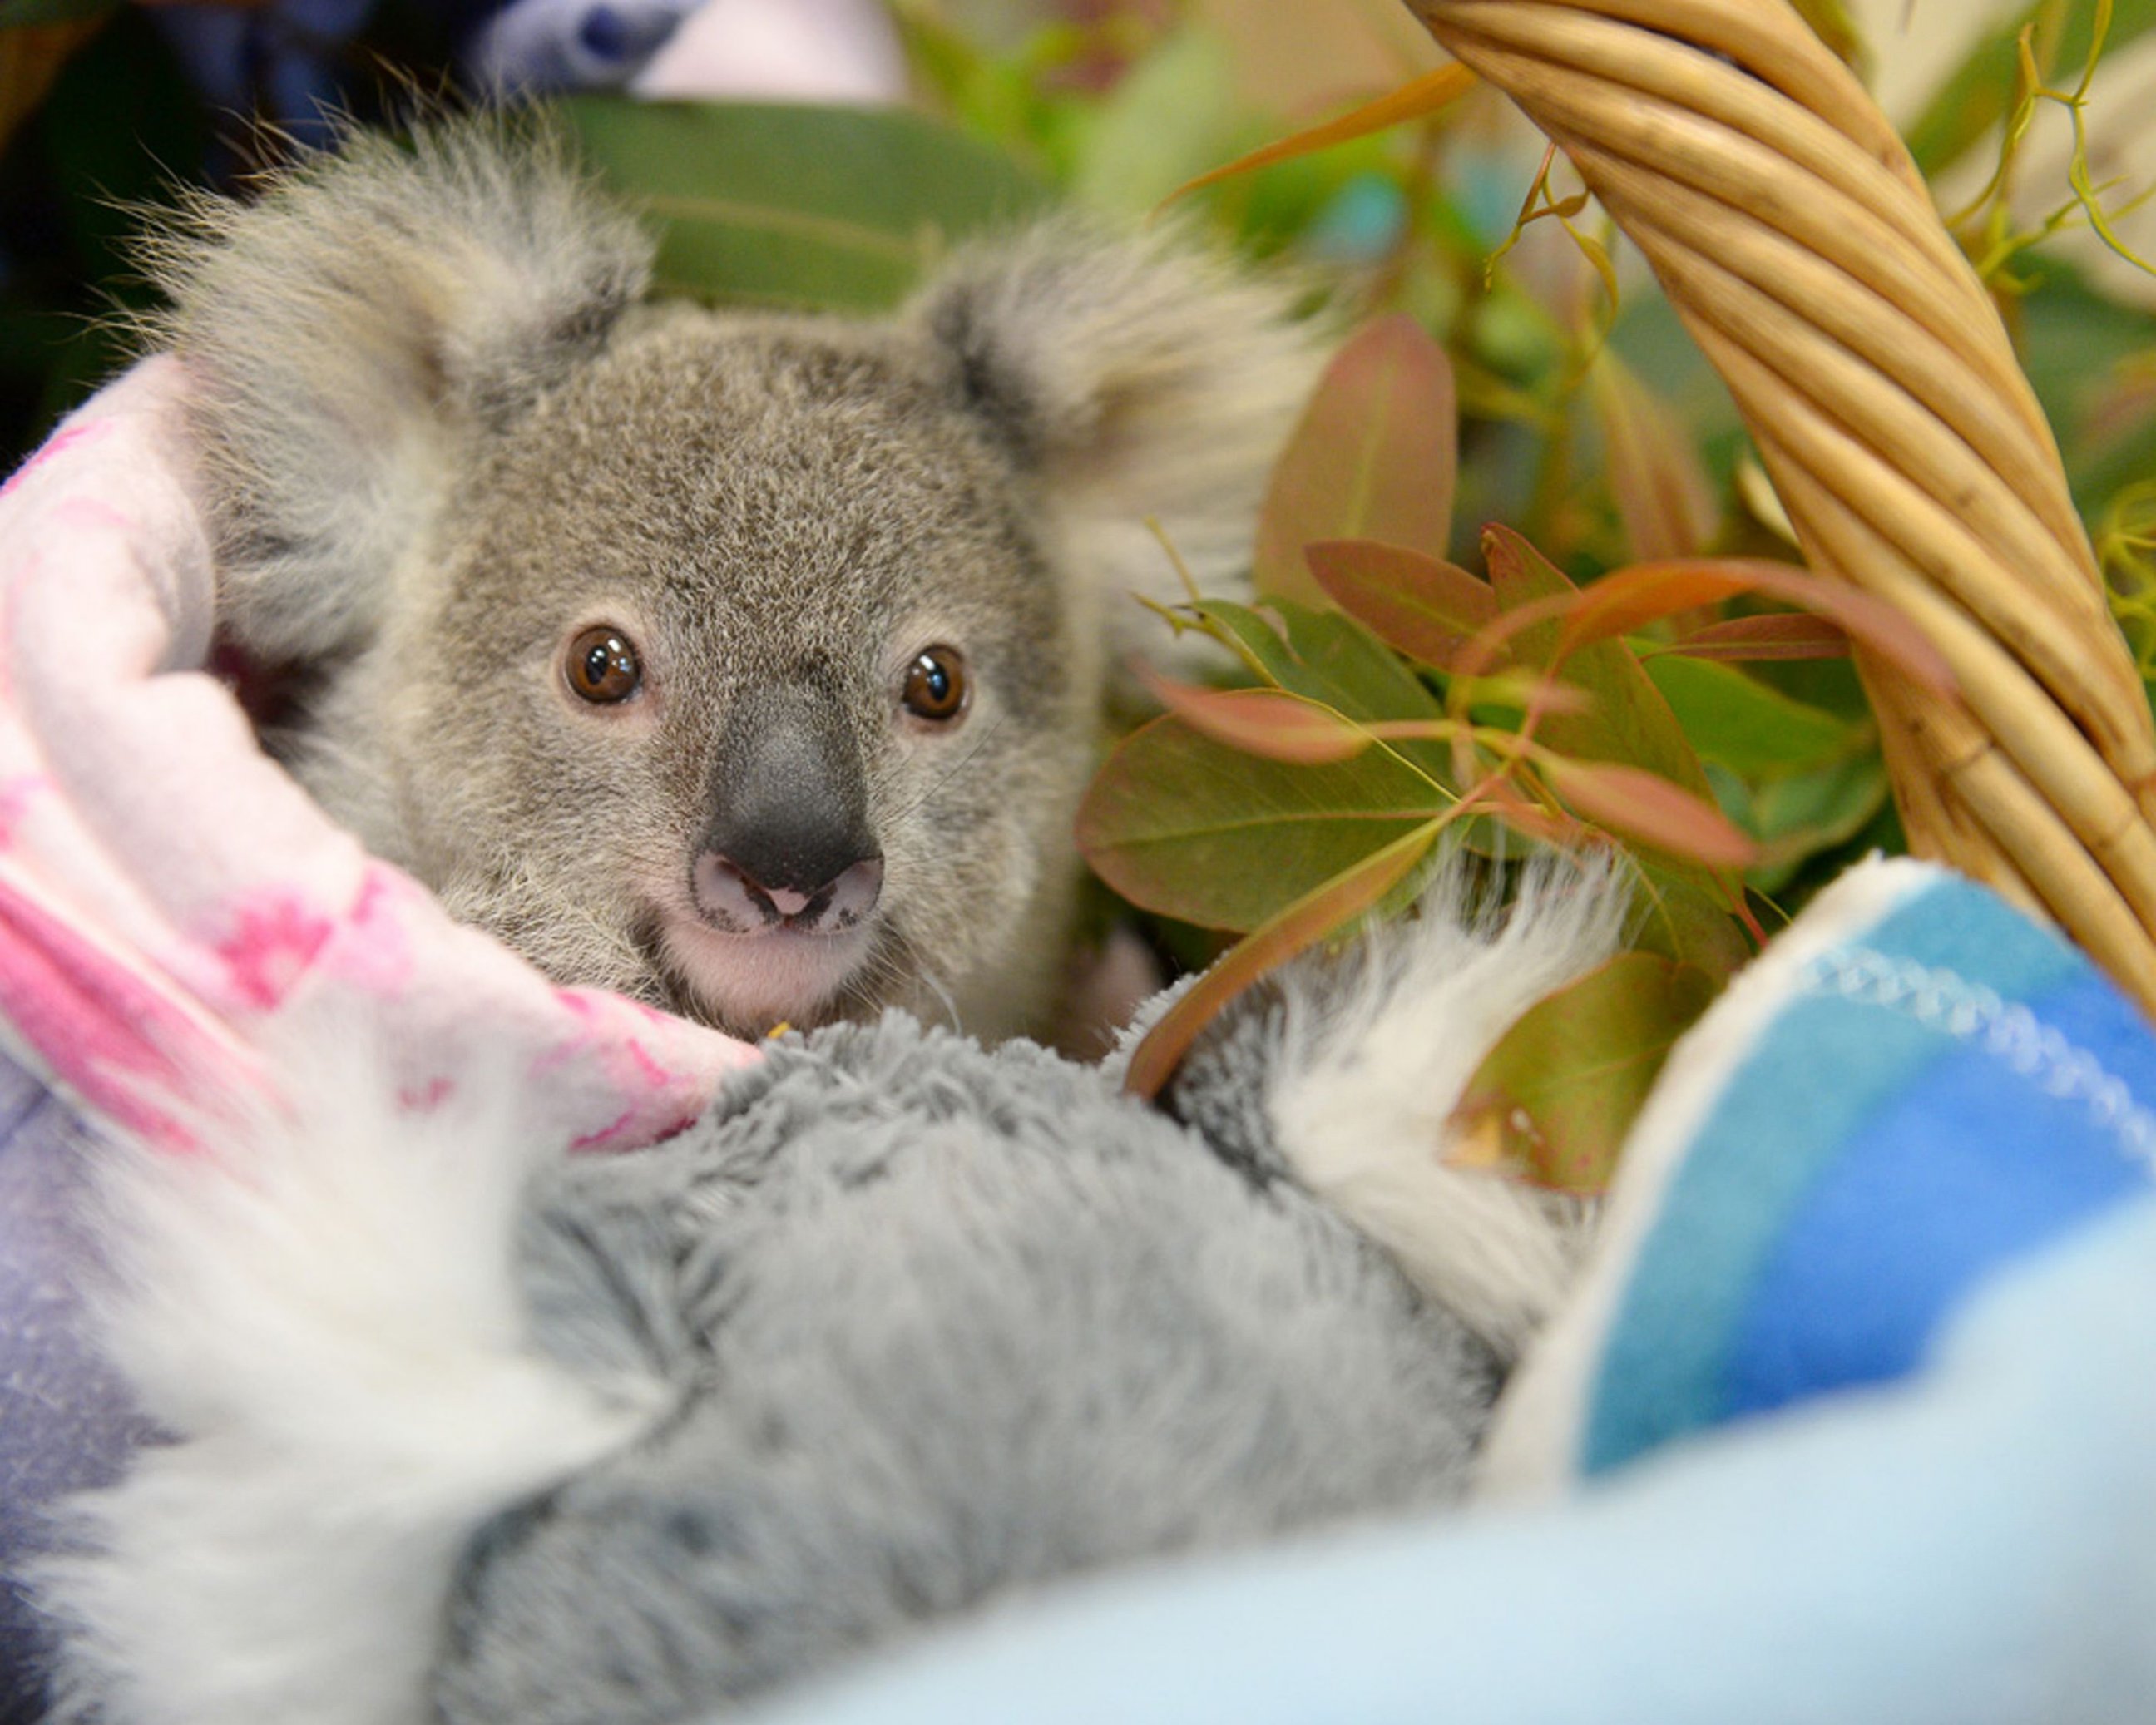 PHOTO: This undated handout photo received from the Australia Zoo on Sept. 19, 2016, shows Shayne, a nine-month-old orphaned baby koala who has found solace cuddling a fluffy toy koala in the absence of his dead mum.